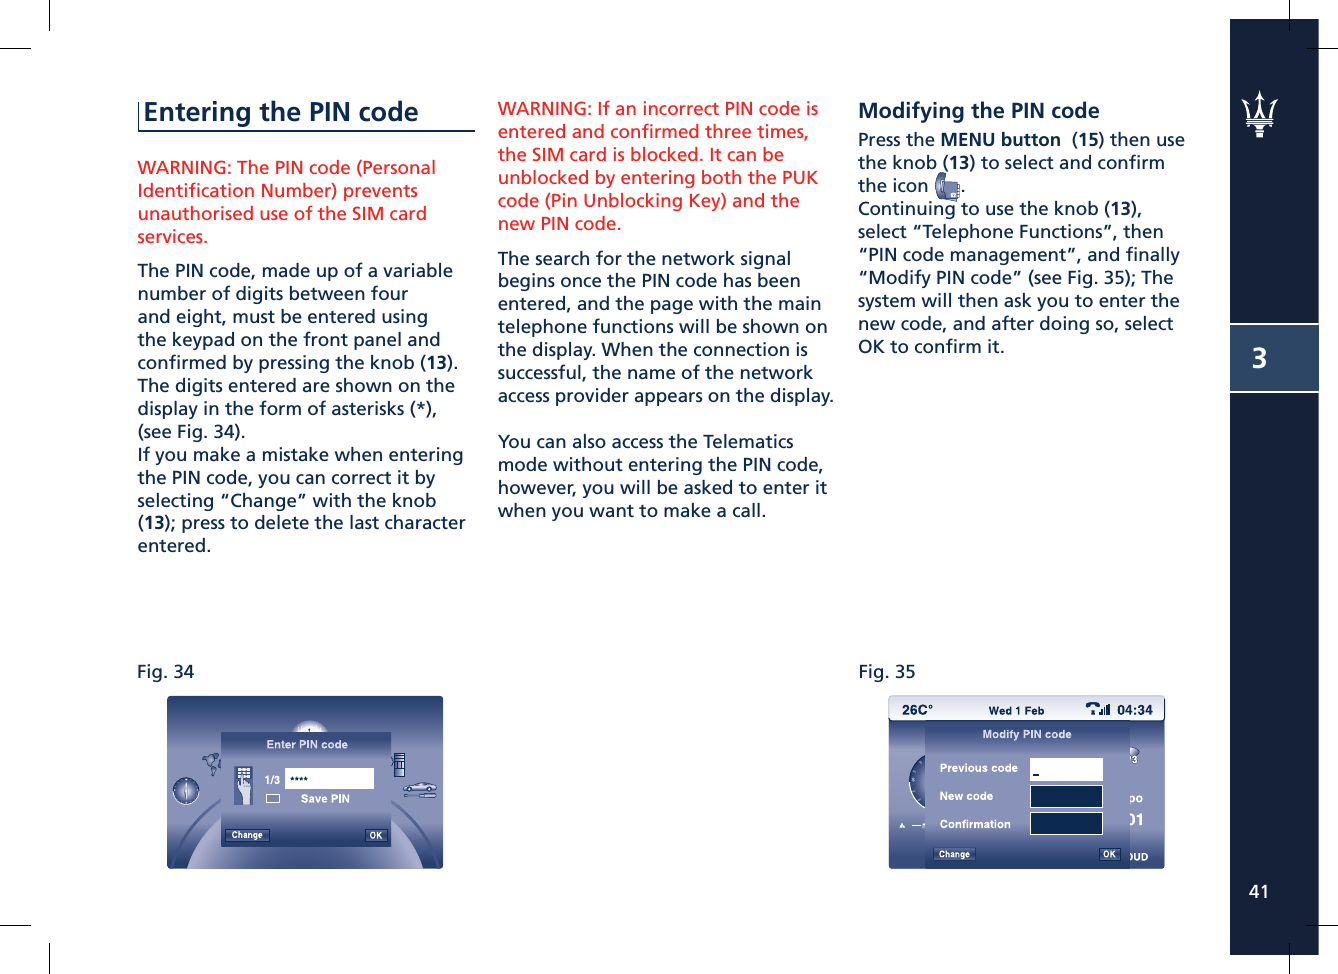 Fig. 34 Fig. 35341Entering the PIN codeWARNING: The PIN code (Personal Identiﬁ cation Number) prevents unauthorised use of the SIM card services.The PIN code, made up of a variable number of digits between four and eight, must be entered using the keypad on the front panel and conﬁ rmed by pressing the knob (13).The digits entered are shown on the display in the form of asterisks (*), (see Fig. 34).If you make a mistake when entering the PIN code, you can correct it by selecting “Change” with the knob (13); press to delete the last character entered.WARNING: If an incorrect PIN code is entered and conﬁ rmed three times, the SIM card is blocked. It can be unblocked by entering both the PUK code (Pin Unblocking Key) and the new PIN code.The search for the network signal begins once the PIN code has been entered, and the page with the main telephone functions will be shown on the display. When the connection is successful, the name of the network access provider appears on the display.You can also access the Telematics mode without entering the PIN code, however, you will be asked to enter it when you want to make a call.Modifying the PIN codePress the MENU button  (15) then use the knob (13) to select and conﬁ rm the icon  .Continuing to use the knob (13), select “Telephone Functions”, then “PIN code management”, and ﬁ nally “Modify PIN code” (see Fig. 35); The system will then ask you to enter the new code, and after doing so, select OK to conﬁ rm it.